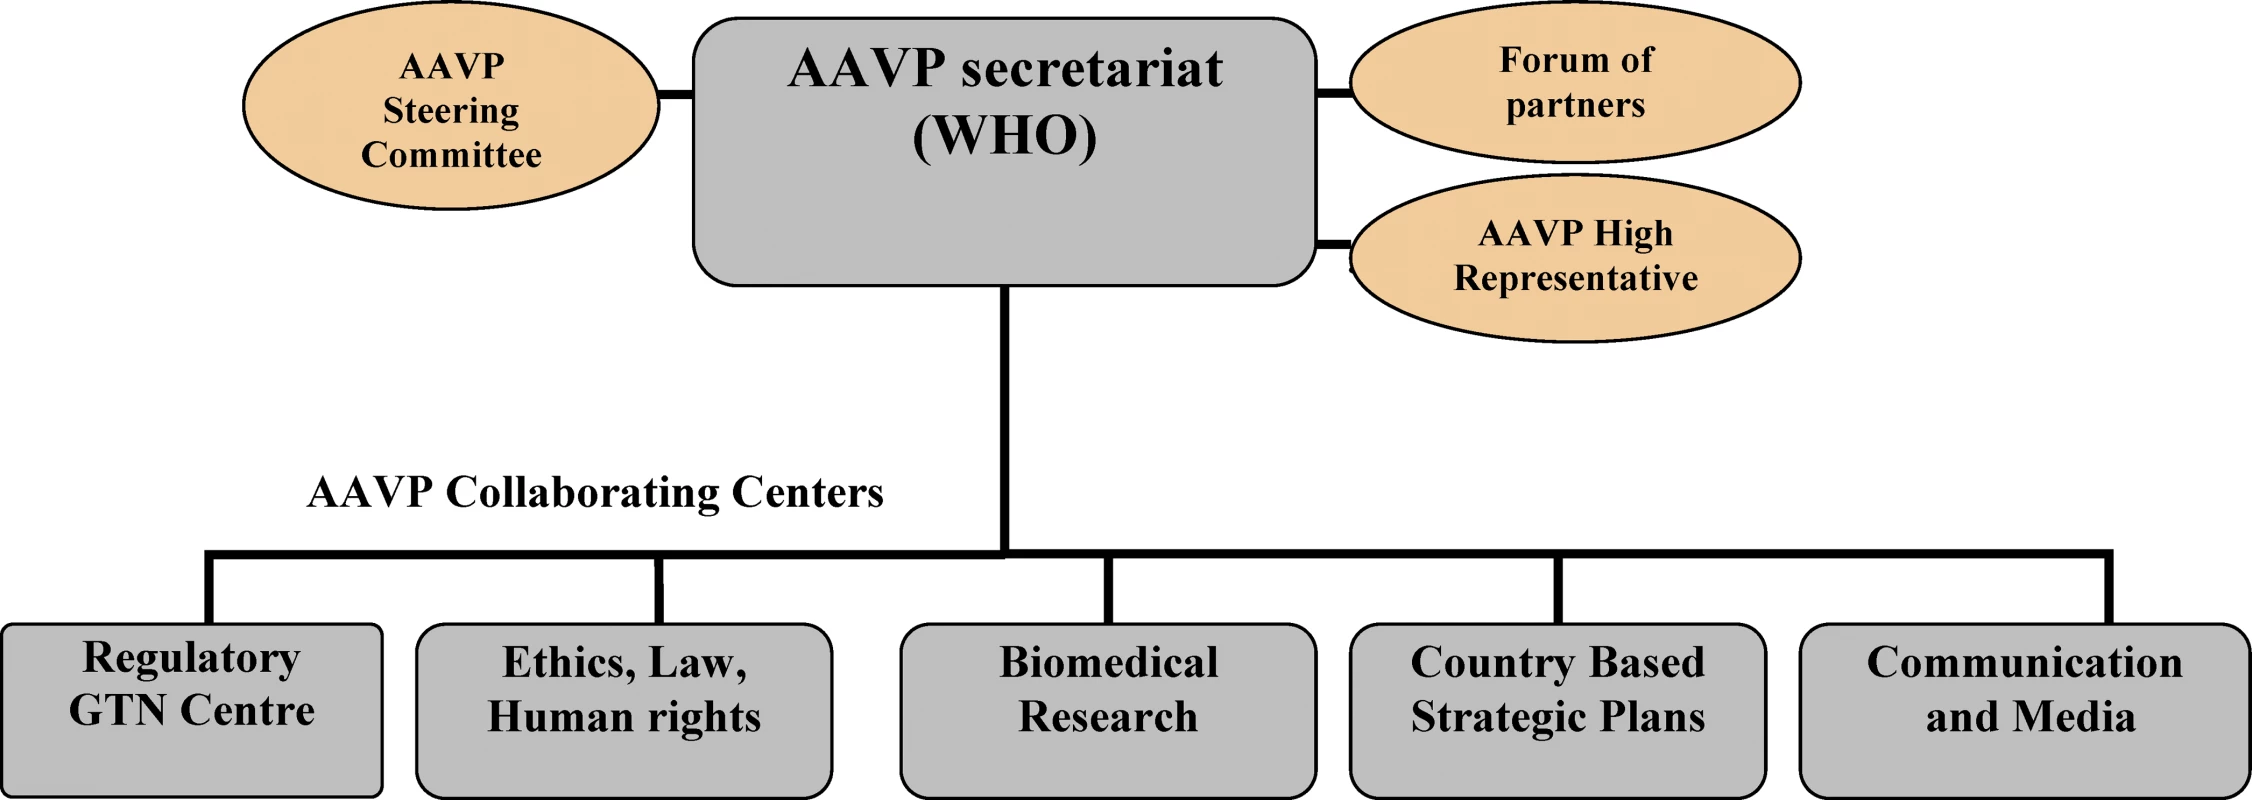 The AAVP Structure